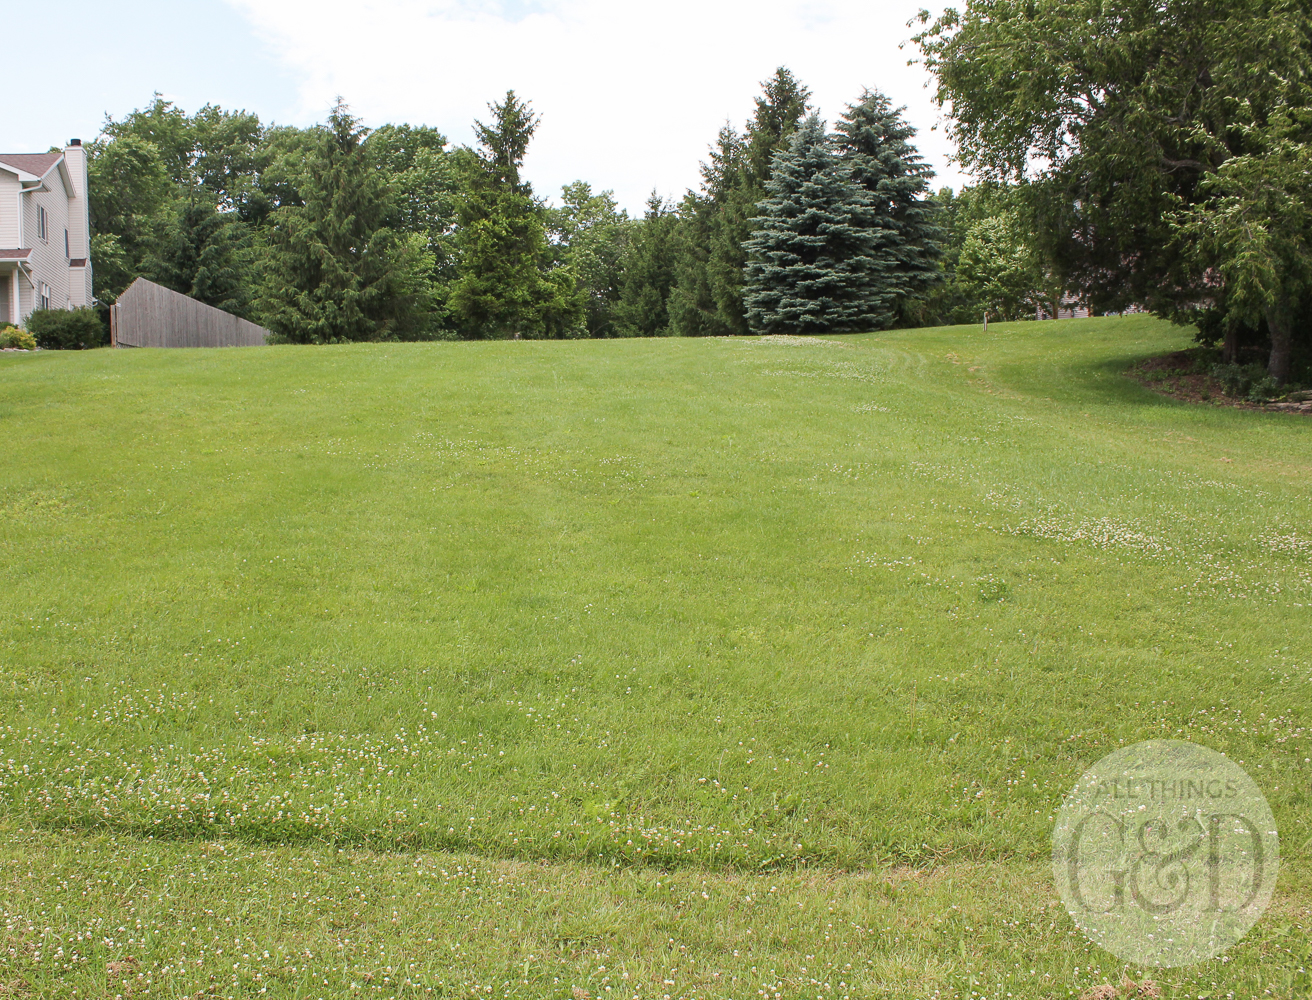 We're building a house! Here's the future site of our new home in Cambridge, WI.